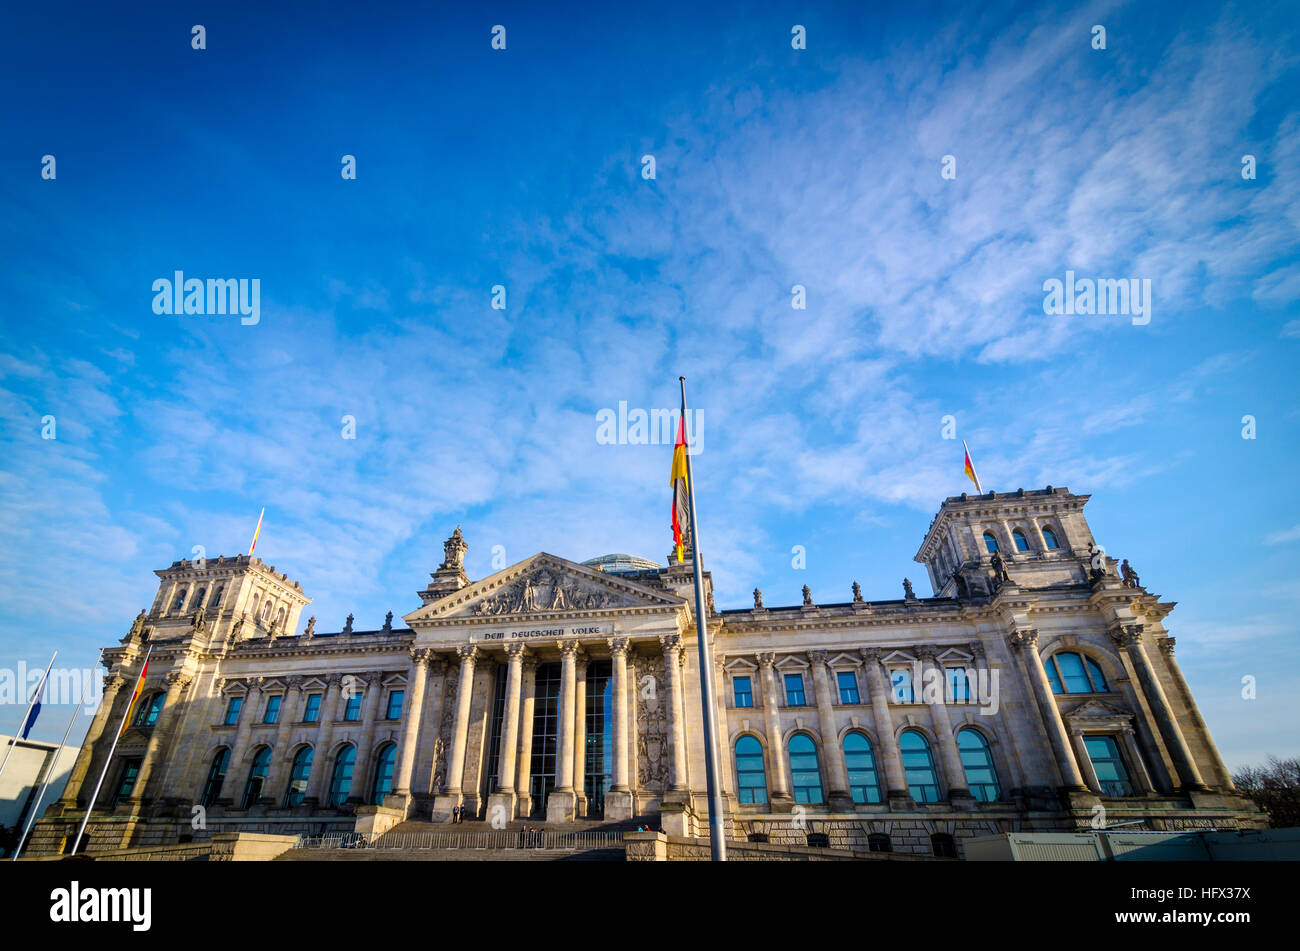 Reichstag Building / Reichstagsgebäude.. German parliament building in a Neo-Renaissance style. Berlin, Germany Stock Photo